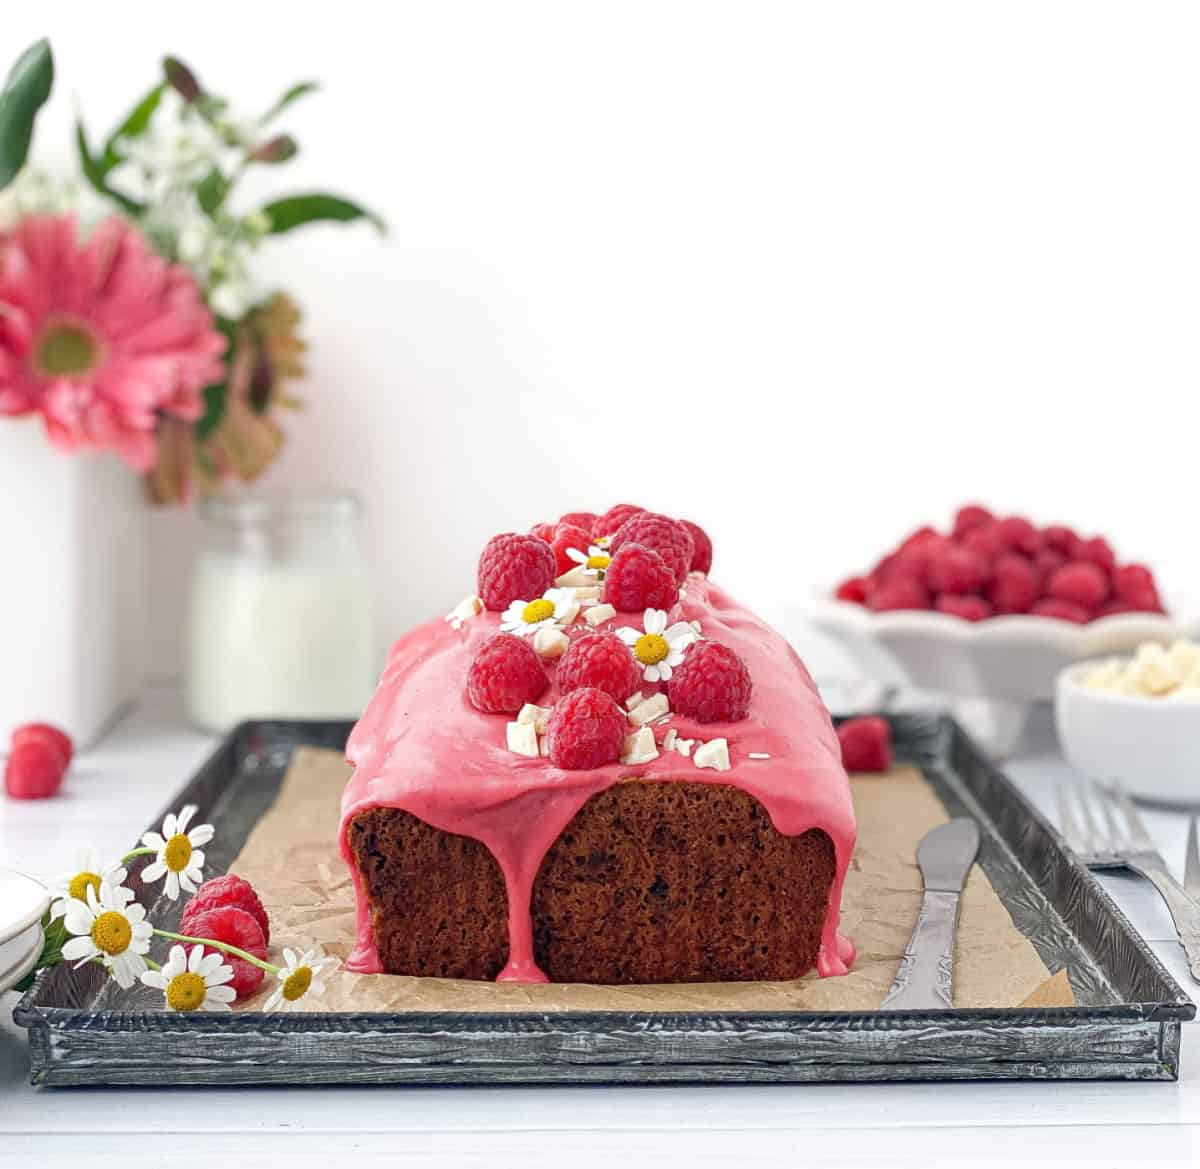 Raspberry and White Chocolate Loaf Cake on a tray.